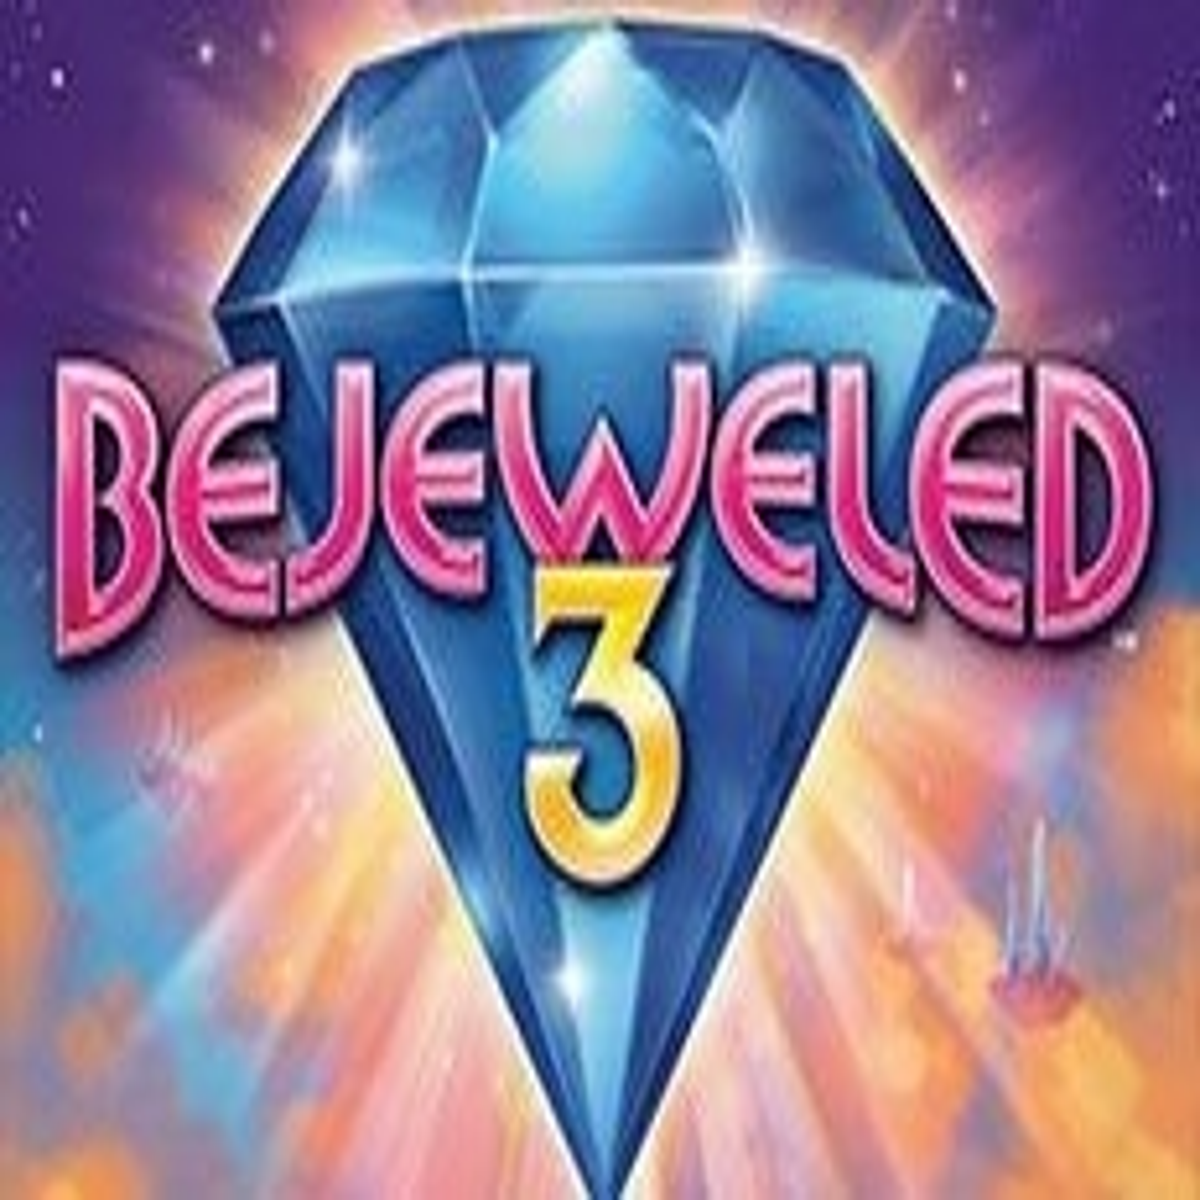 Bejeweled 3 Review